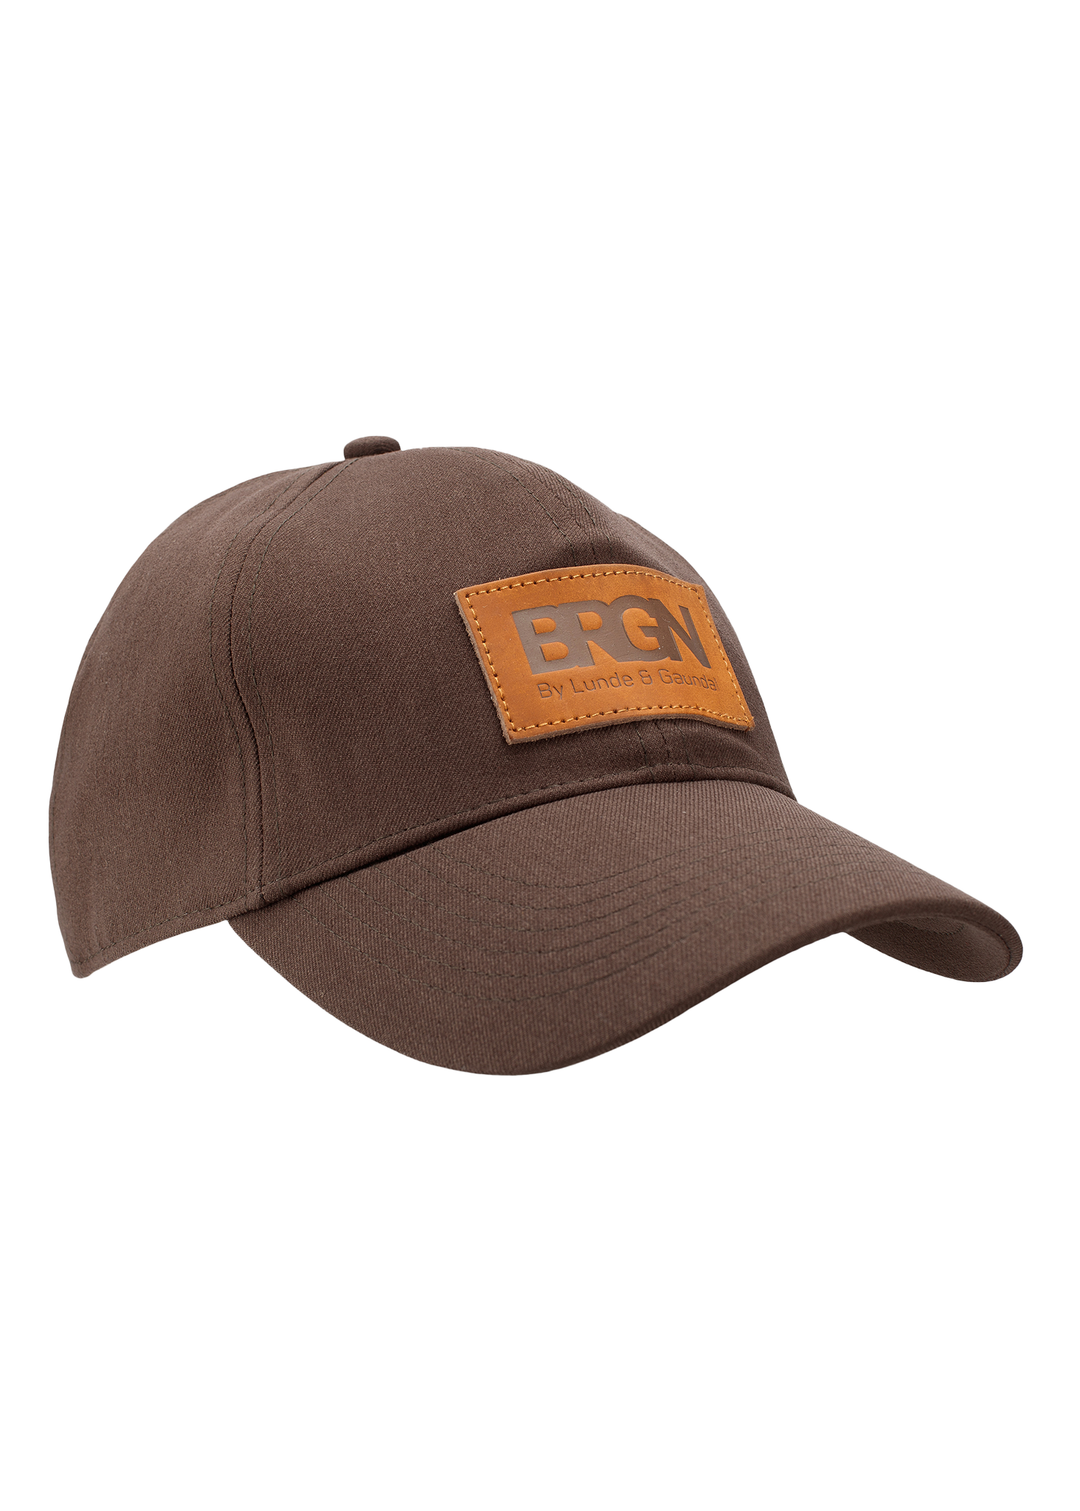 BRGN by Lunde & Gaundal Solregn caps Accessories 187 Chocolate Brown